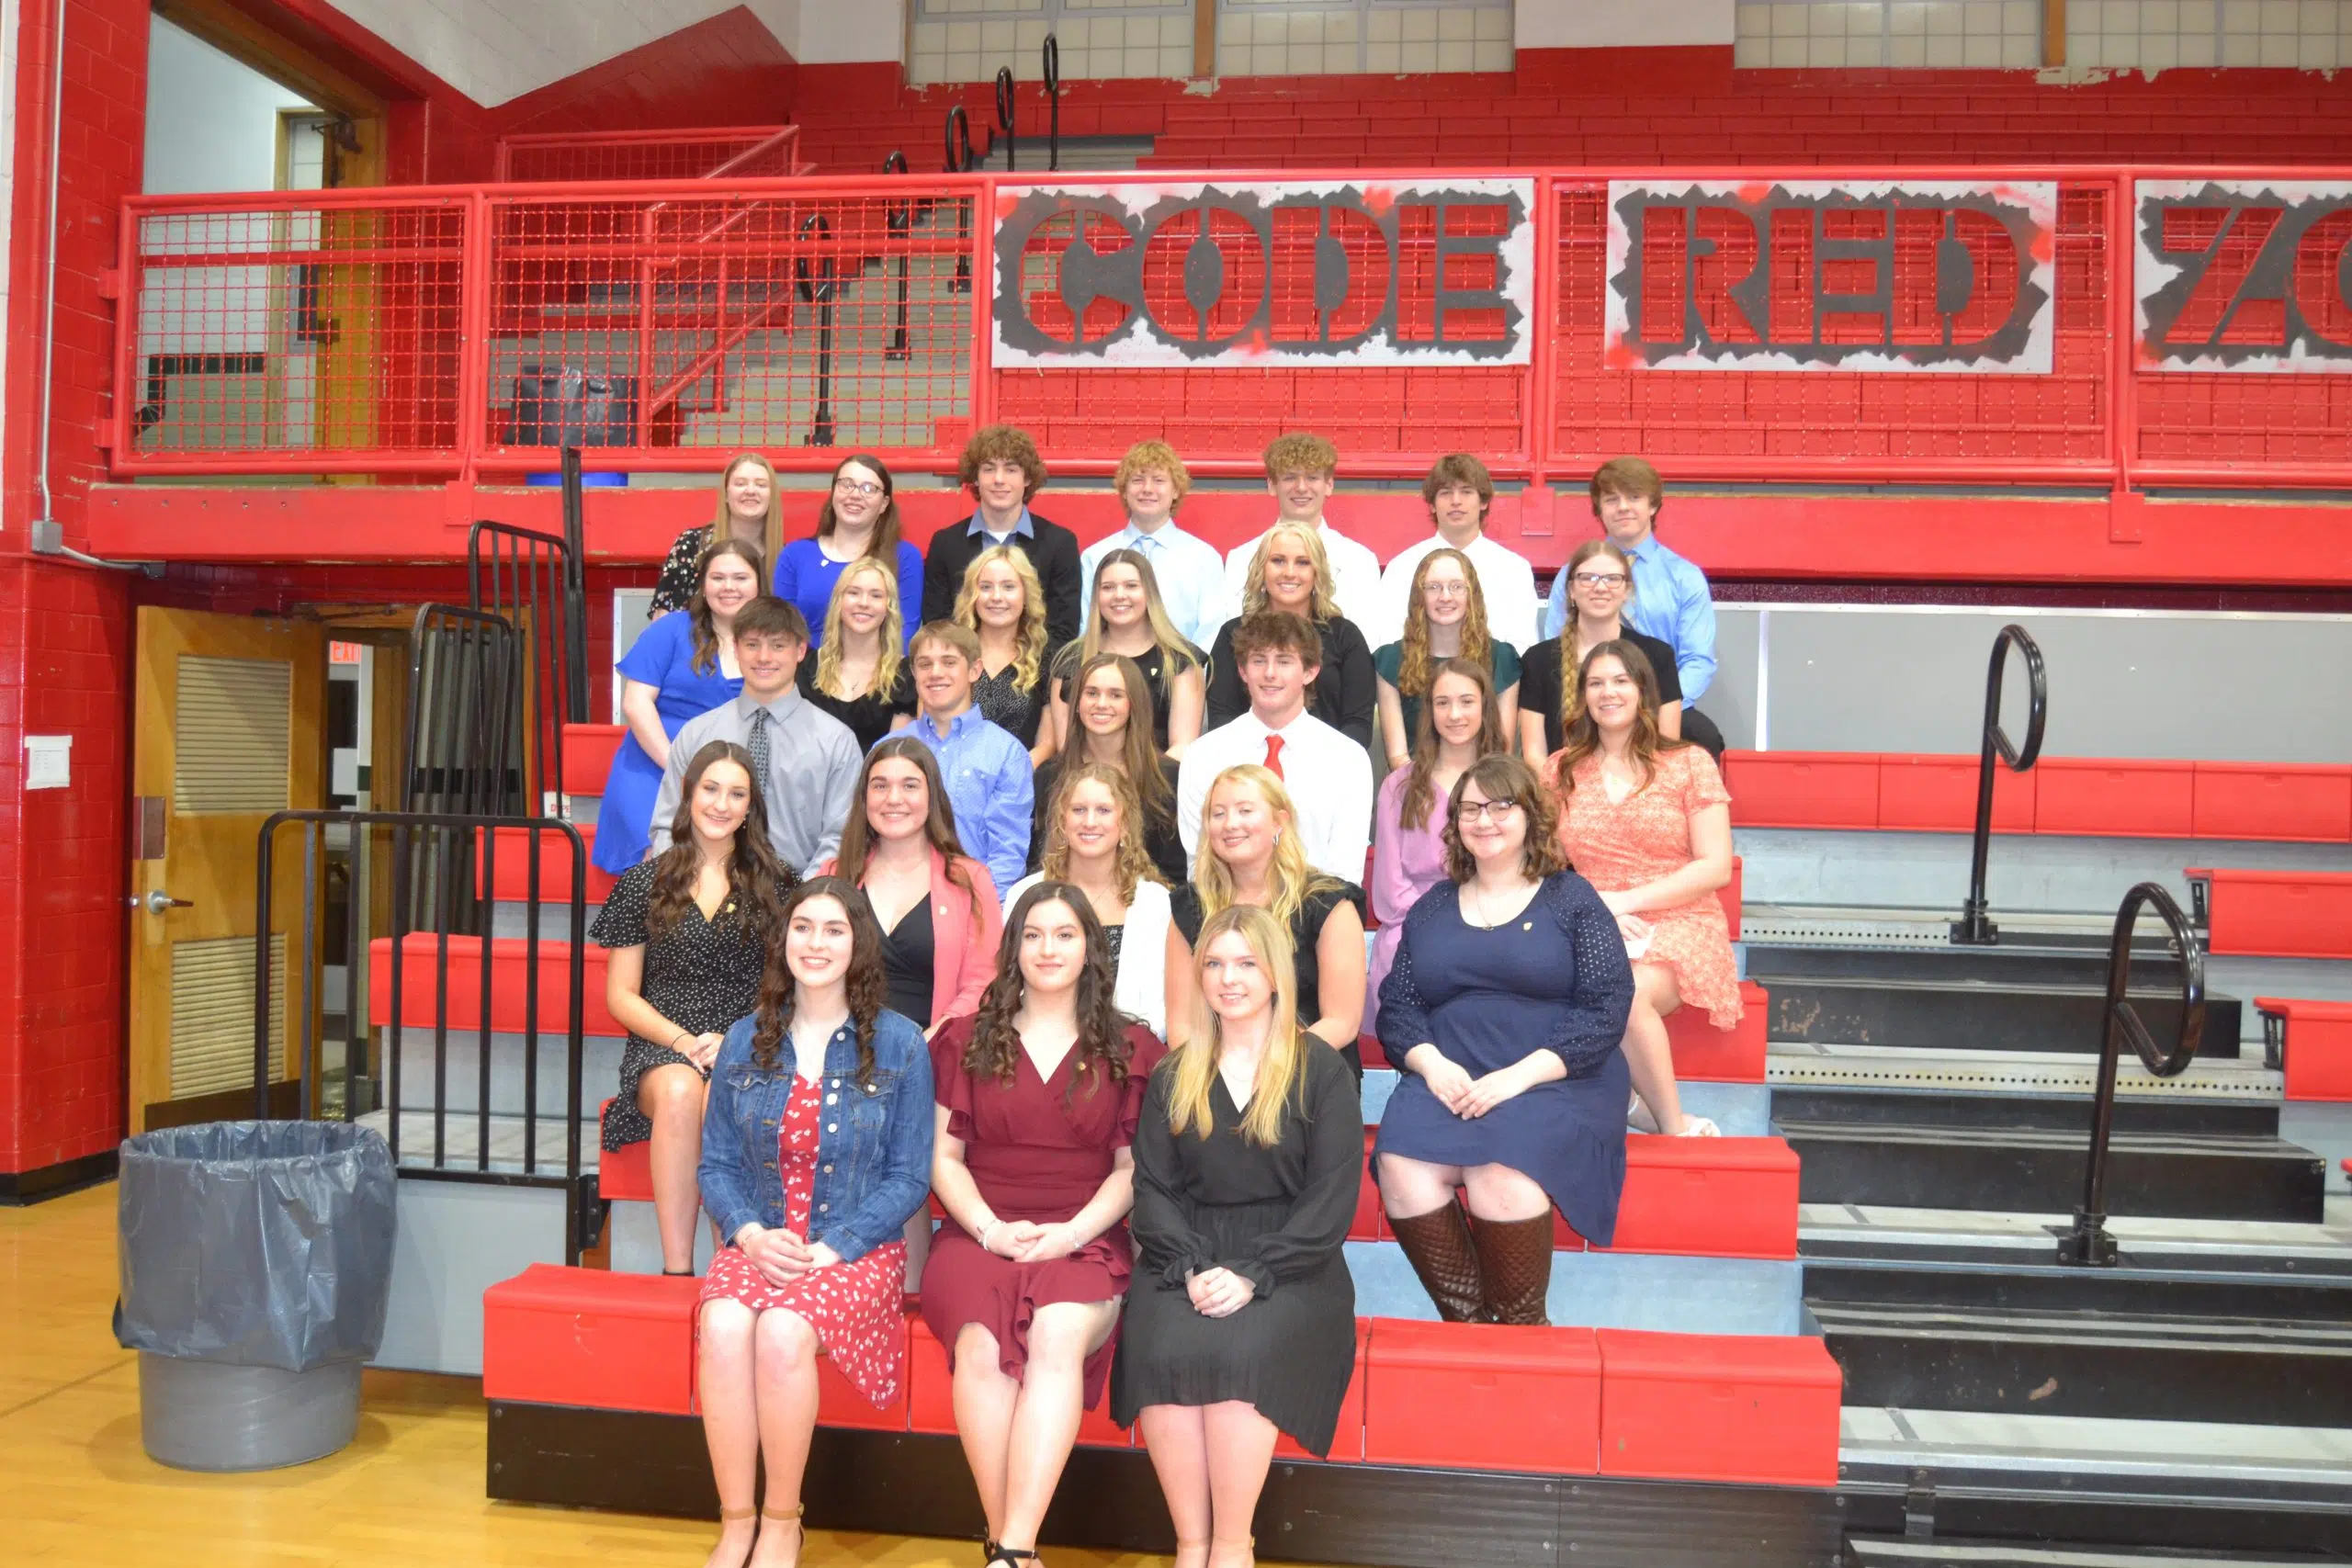 Vandalia High School holds National Honor Society Induction Ceremony